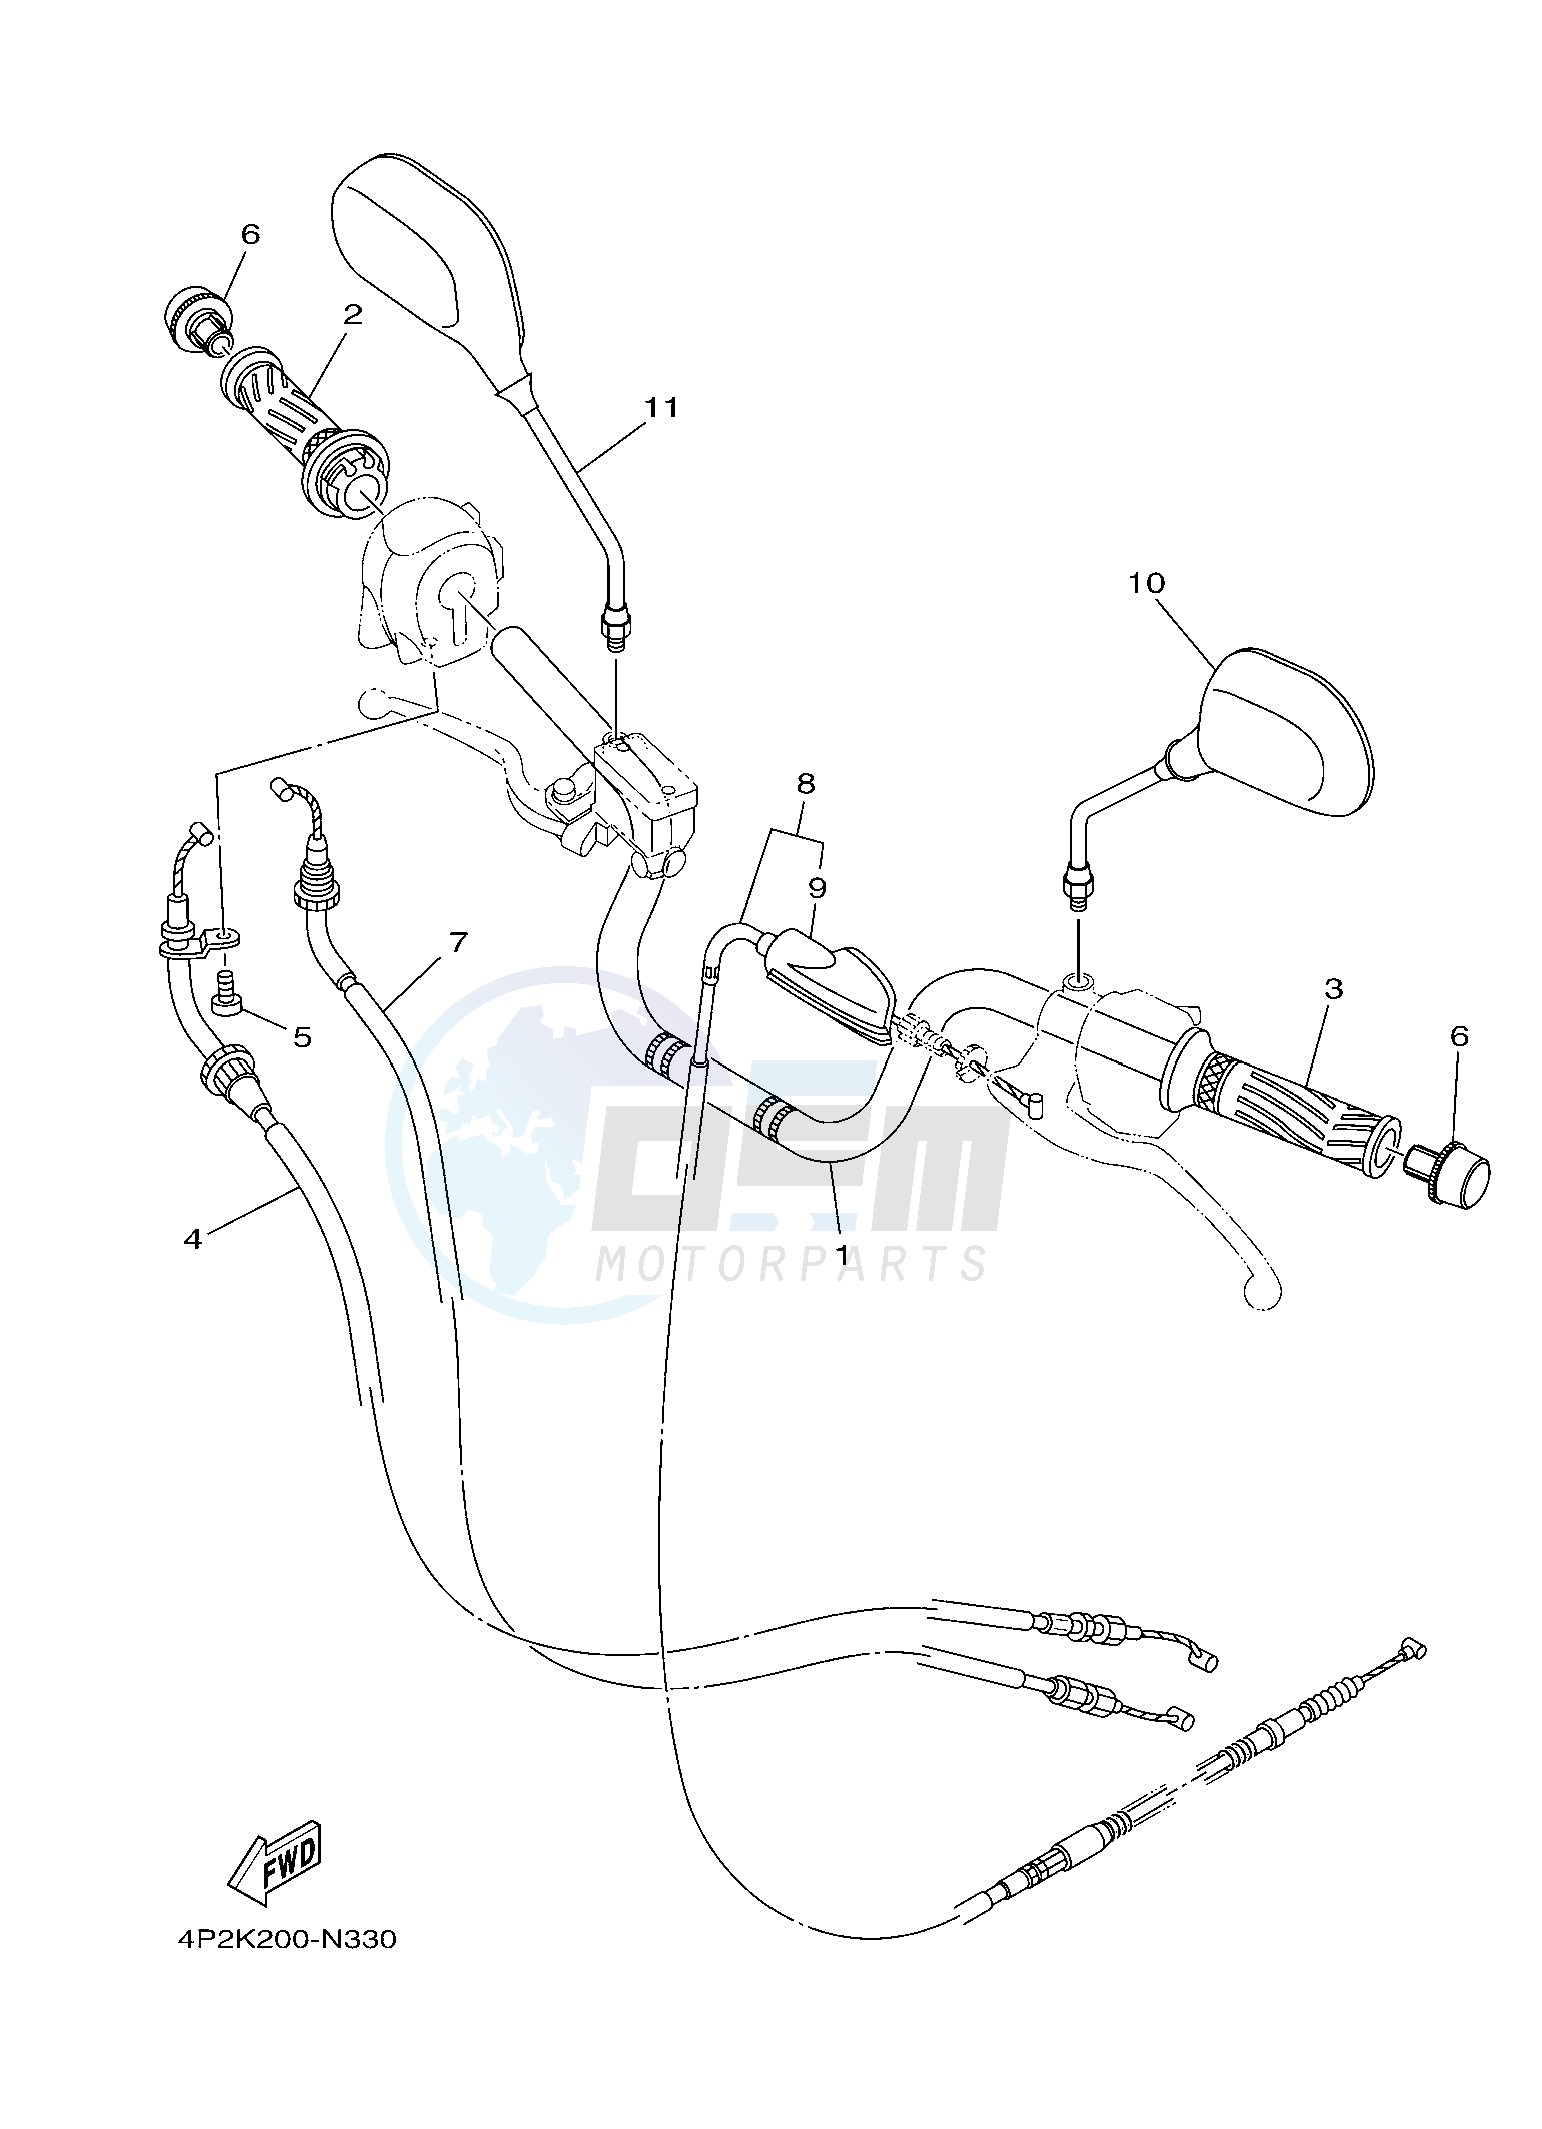 STEERING HANDLE & CABLE 2 image